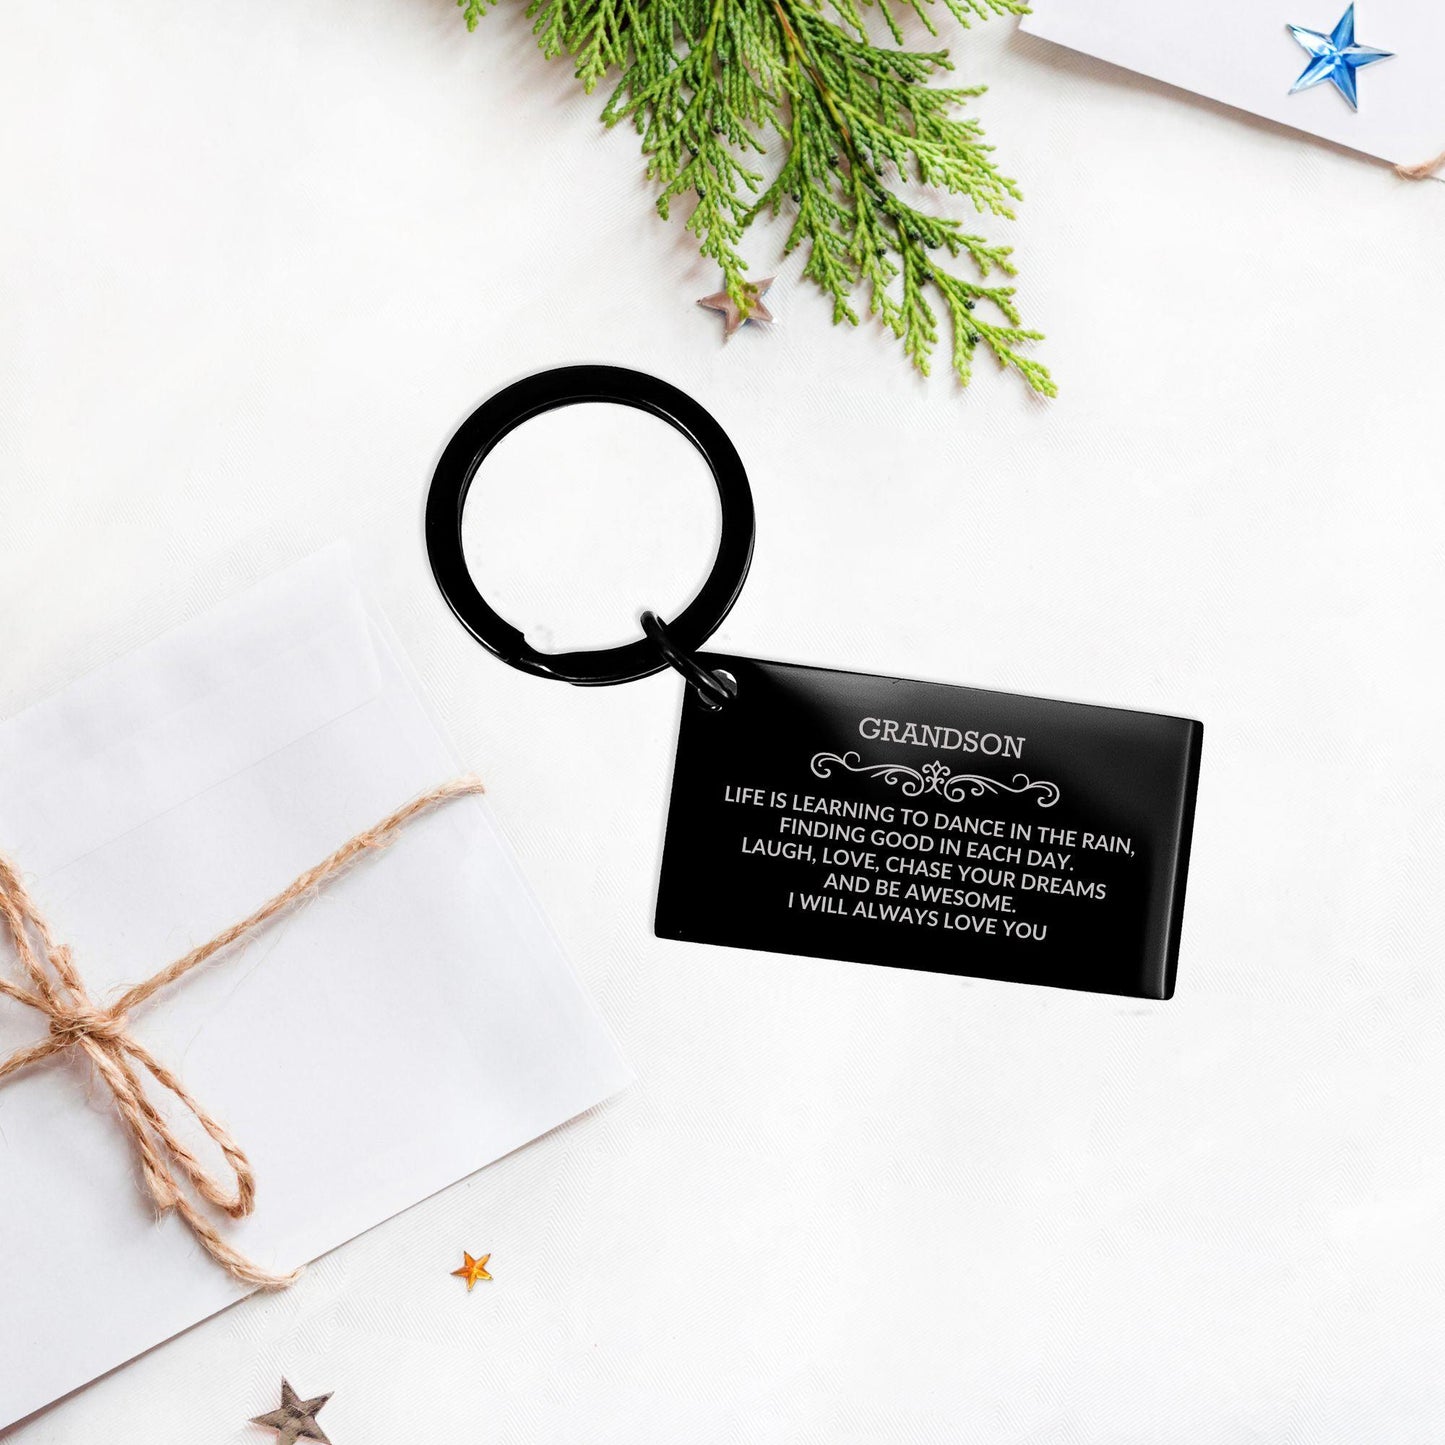 Grandson Black Engraved Keychain, Motivational Heartfelt Birthday, Christmas Holiday Gifts For Grandson, Life is Learning to Dance in the Rain, You are Always in My Heart - Mallard Moon Gift Shop